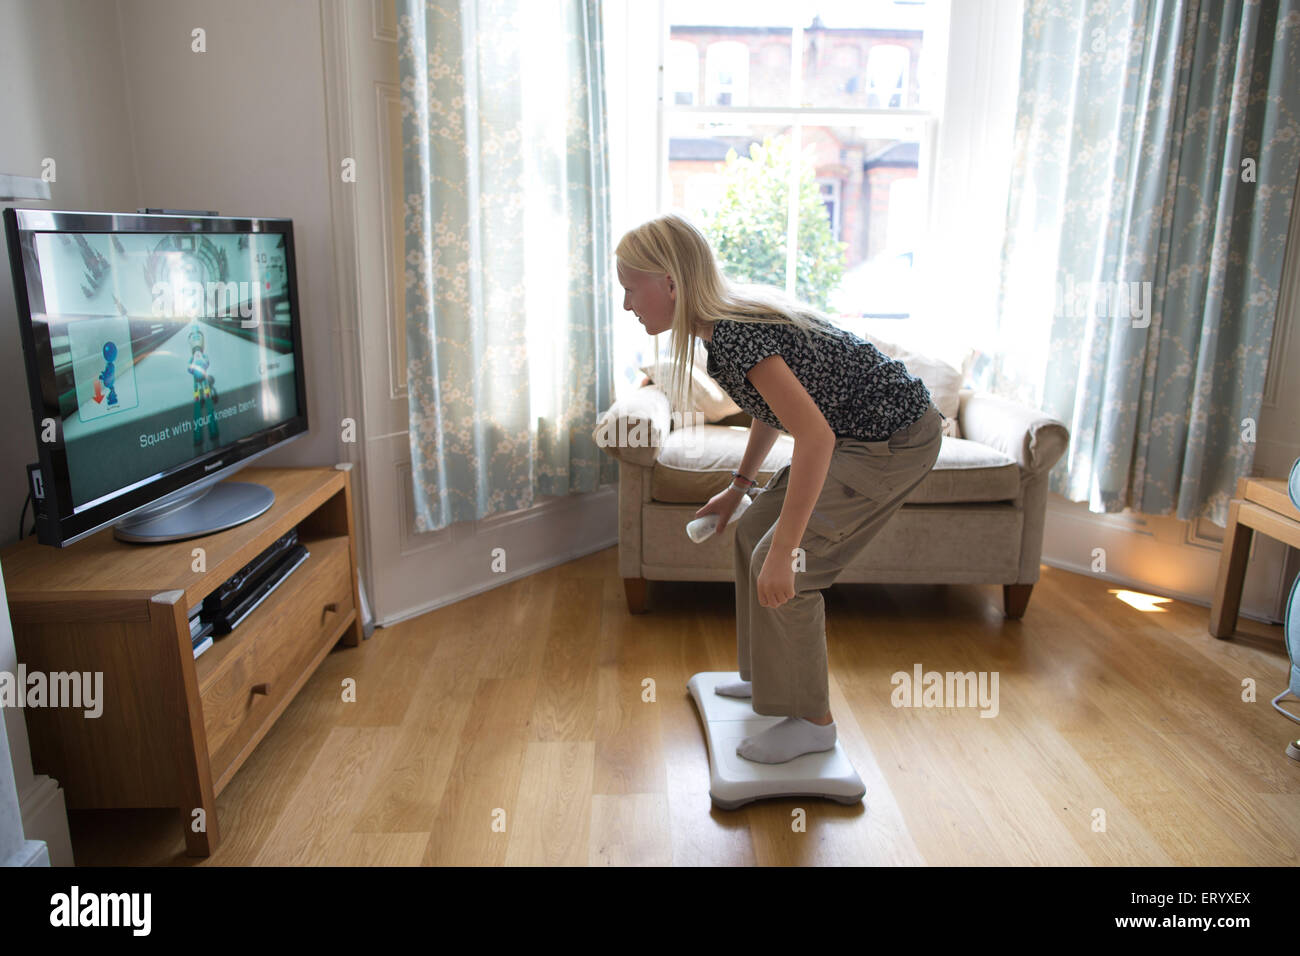 11 year old girl playing Wii game console at home in the living room during the long school summer holiday, London, UK Stock Photo